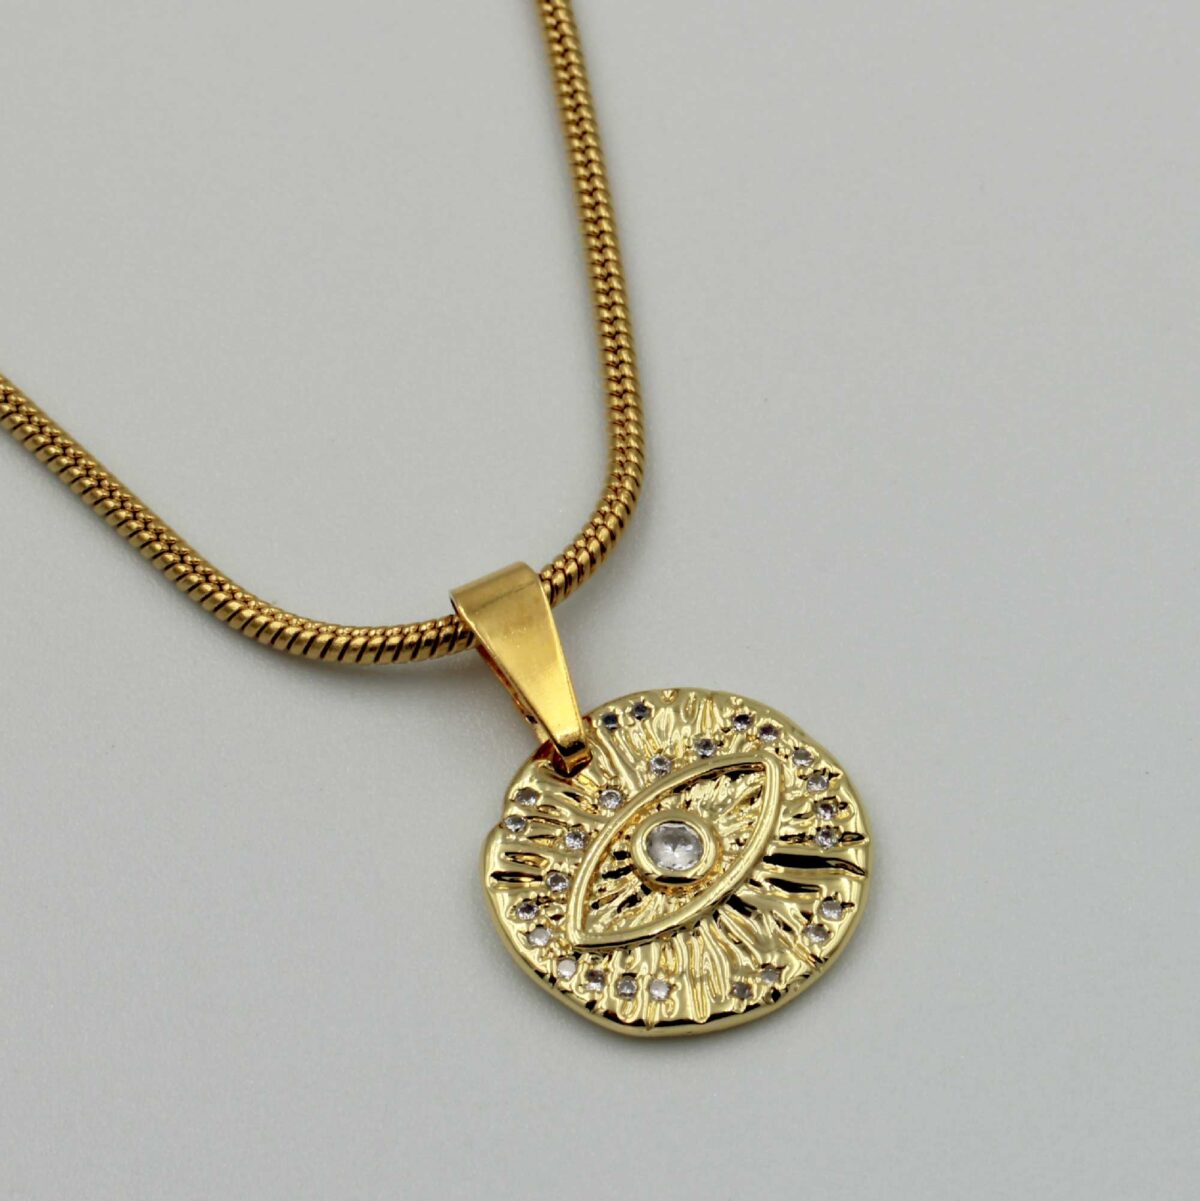 Gold Women's Necklace with Eye Shape Pattern